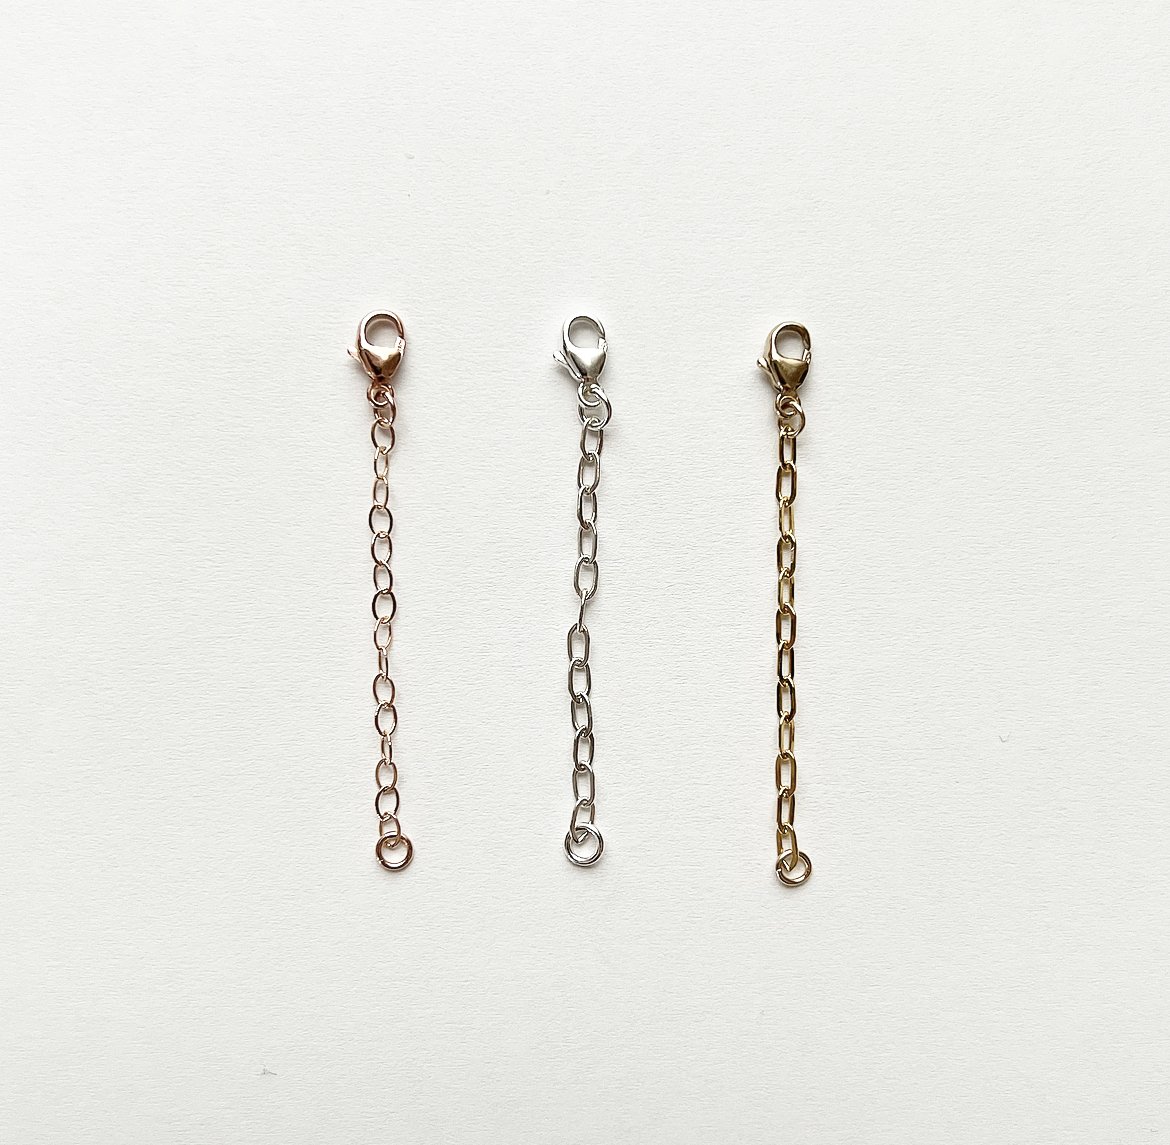 Gold Necklace Extenders Delicate 1,2,3 Inches Necklace Extension Chain  Set for Necklaces Chokers Bracelets Anklets,2mm Width Chain Extender with